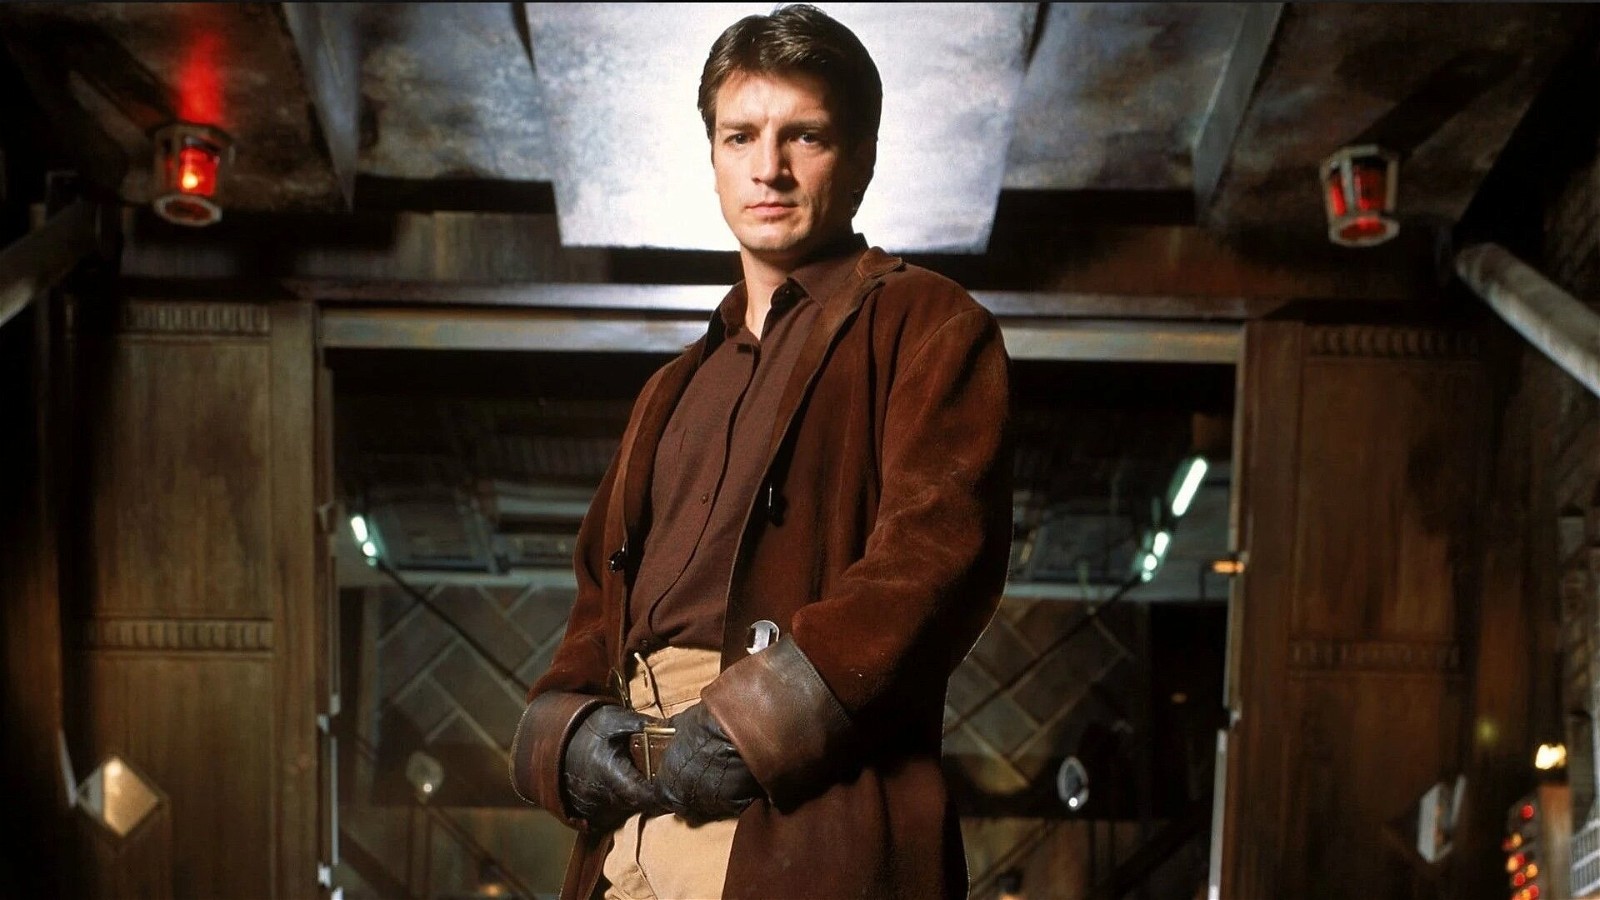 Marvel actor Nathan Fillion in Firefly